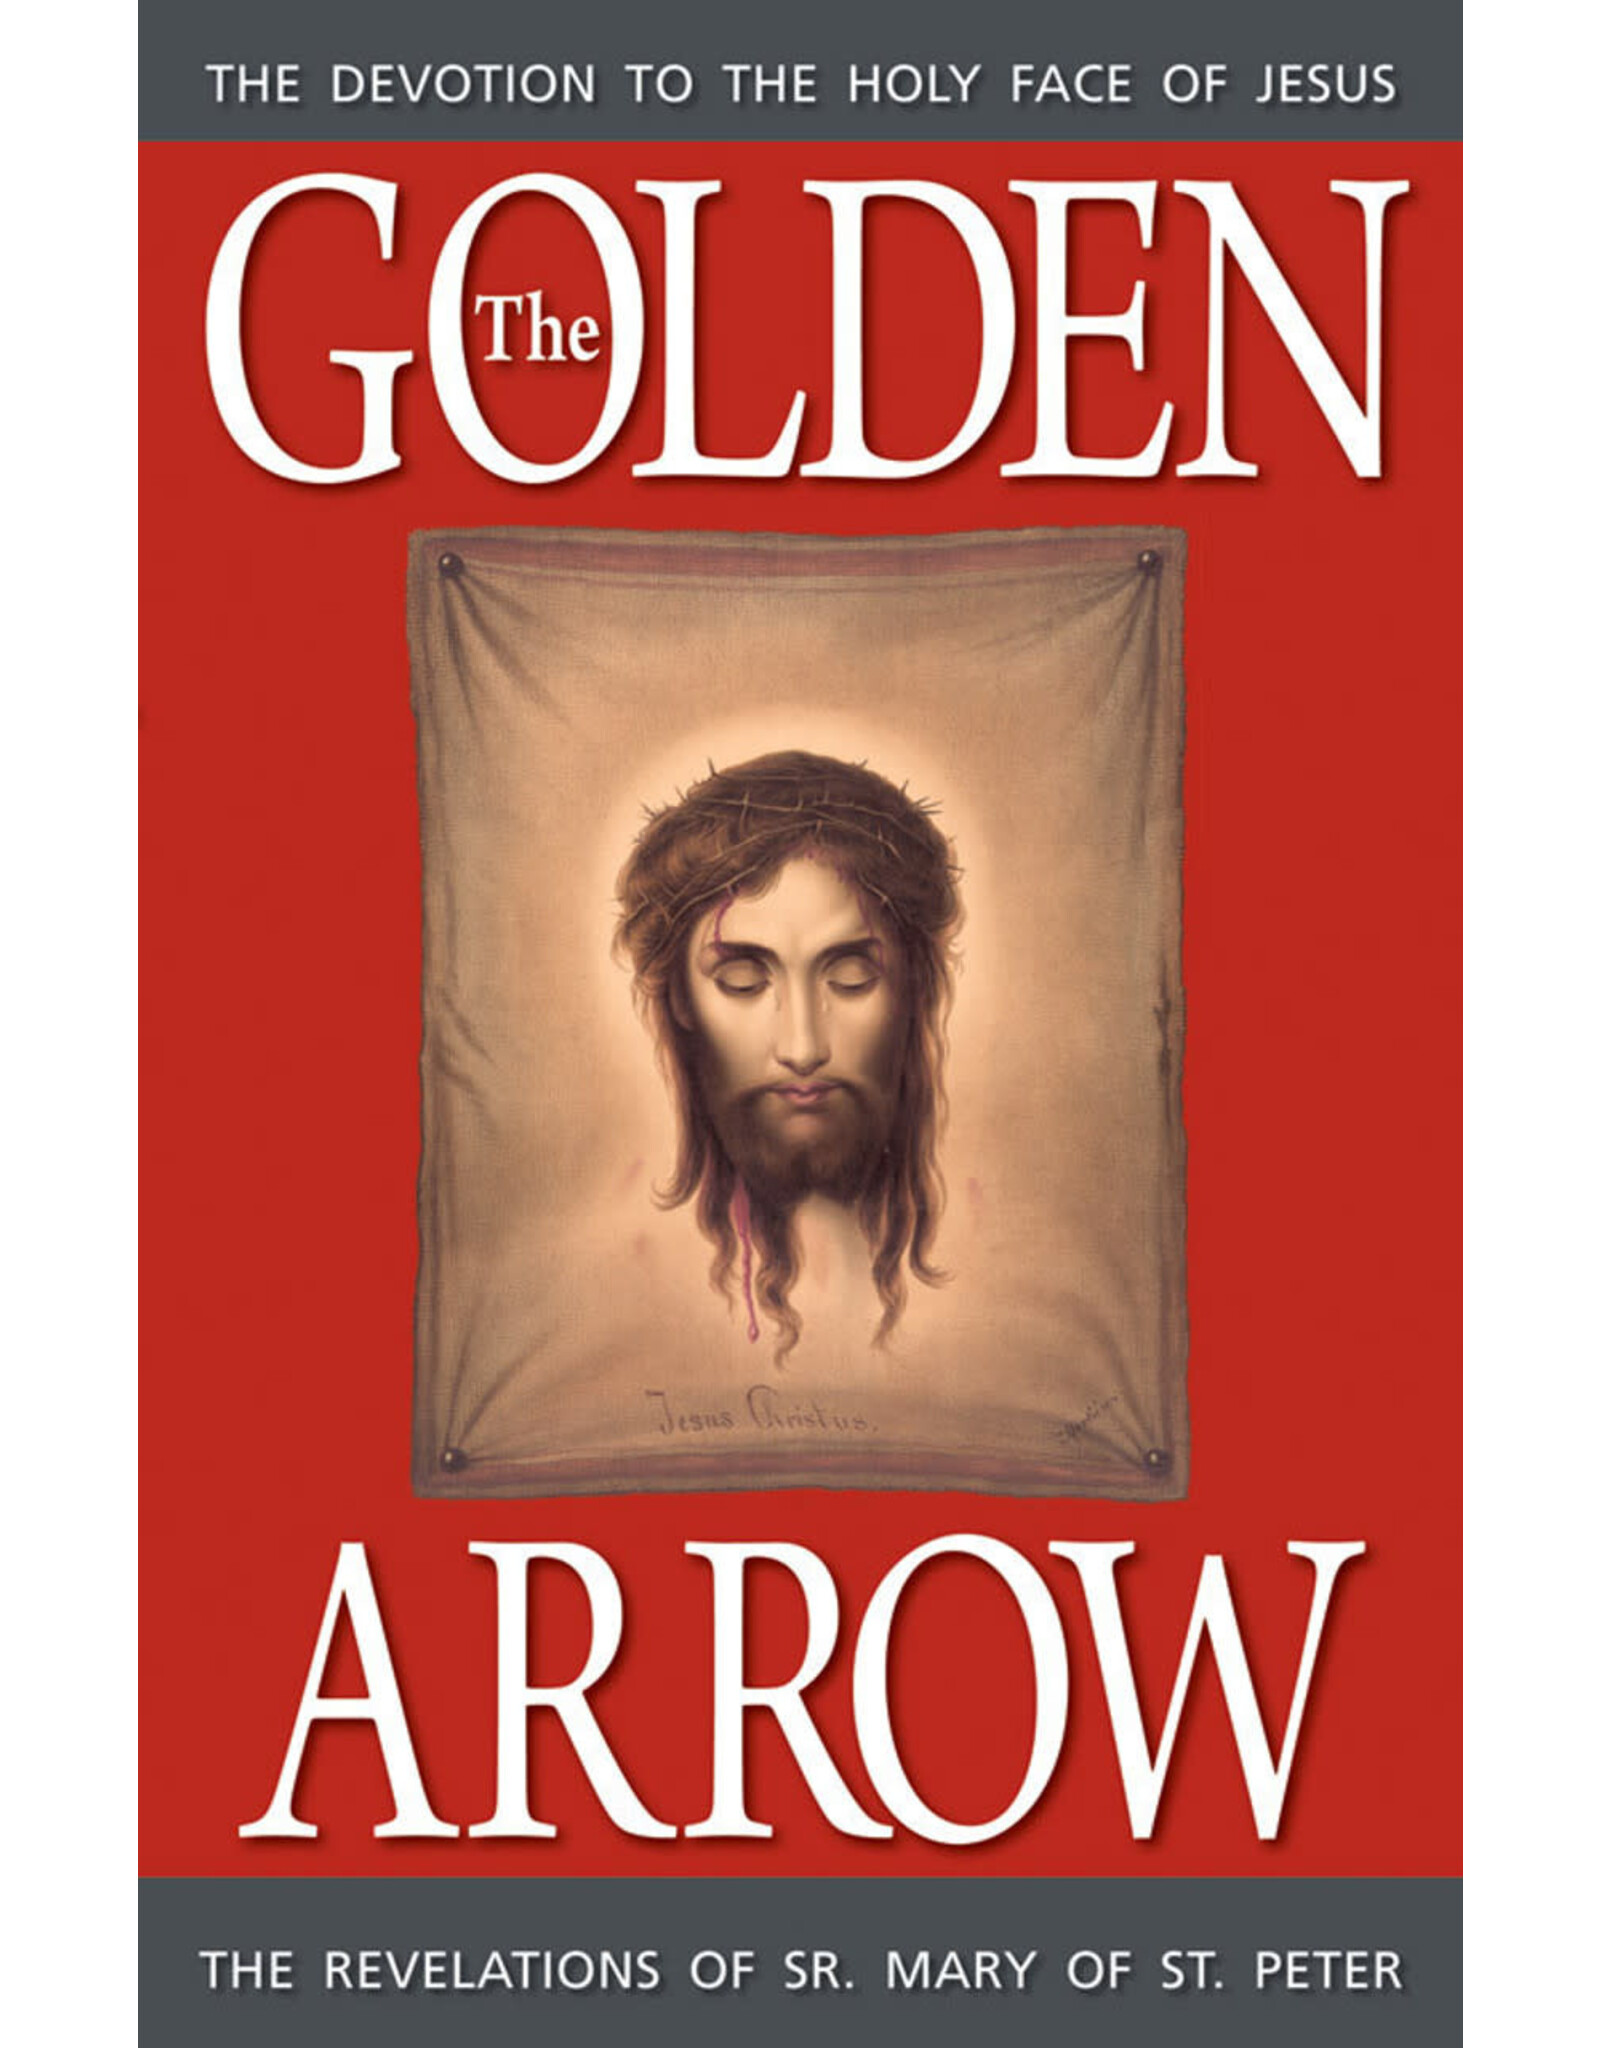 Tan Books (St. Benedict Press) The Golden Arrow: Devotion to the Holy Face of Jesus